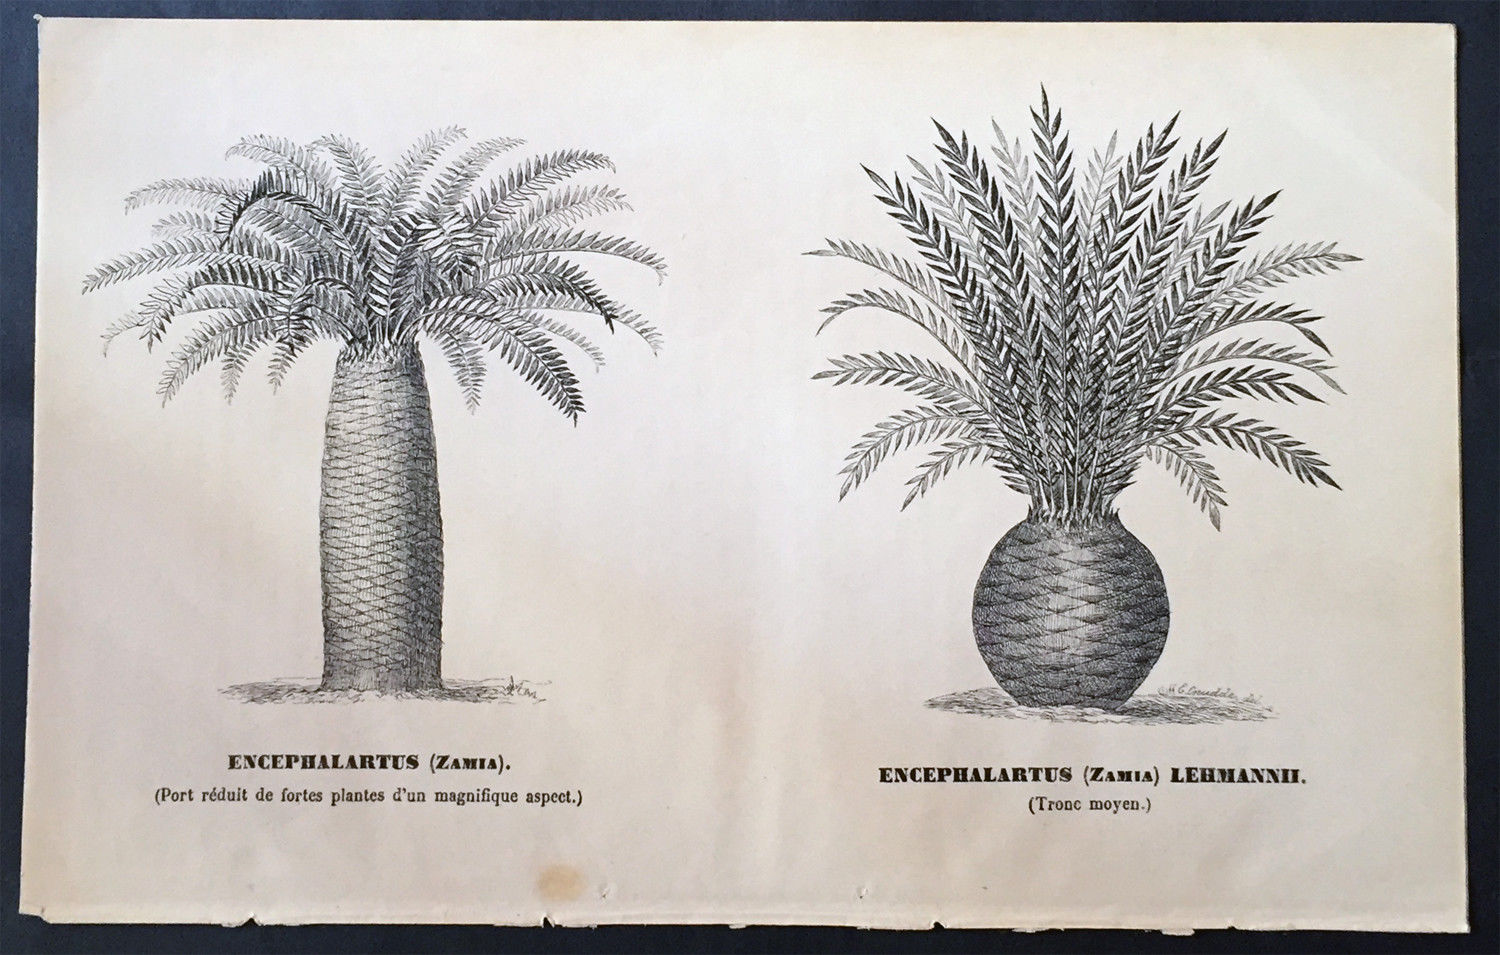 Image from https://www.ebay.com/itm/1880-Edwin-Cruddle-Original-Antique-Print-of-Cycad-Plants-or-Bread-Trees-Palms-/372485935275